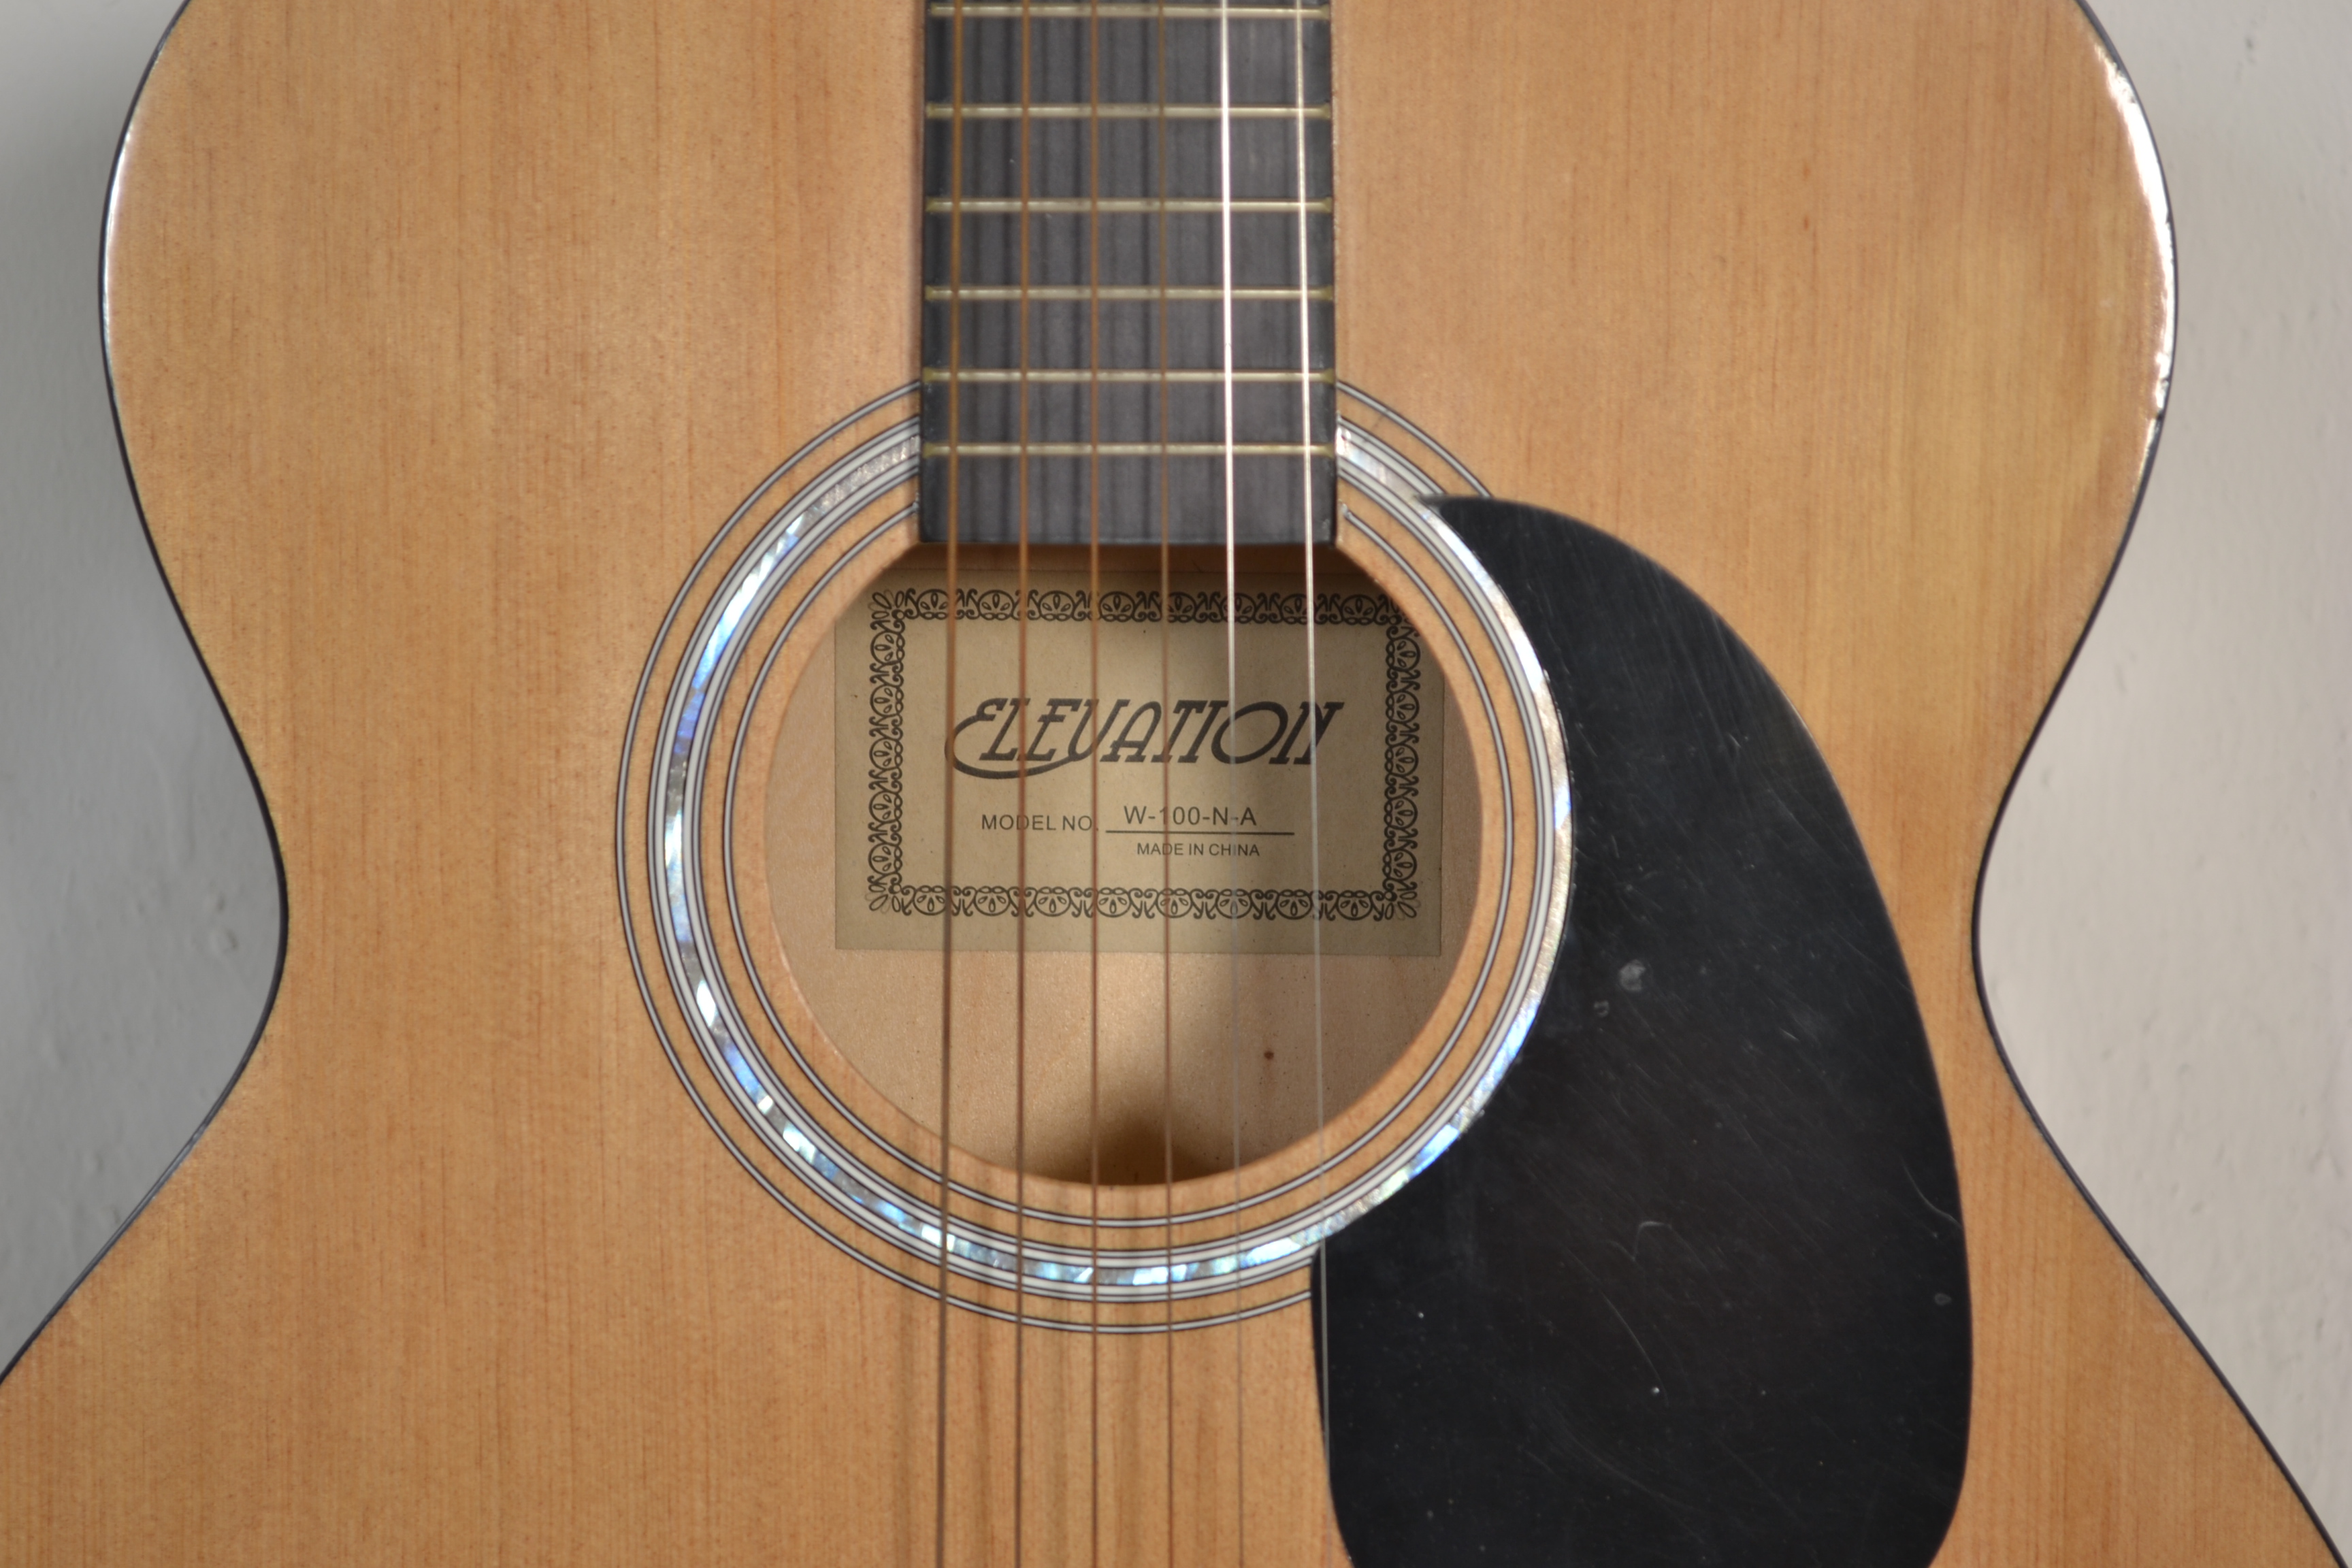 A 20th century ' Elevation ' six string acoustic guitar. Excellent condition, little used. - Image 4 of 5